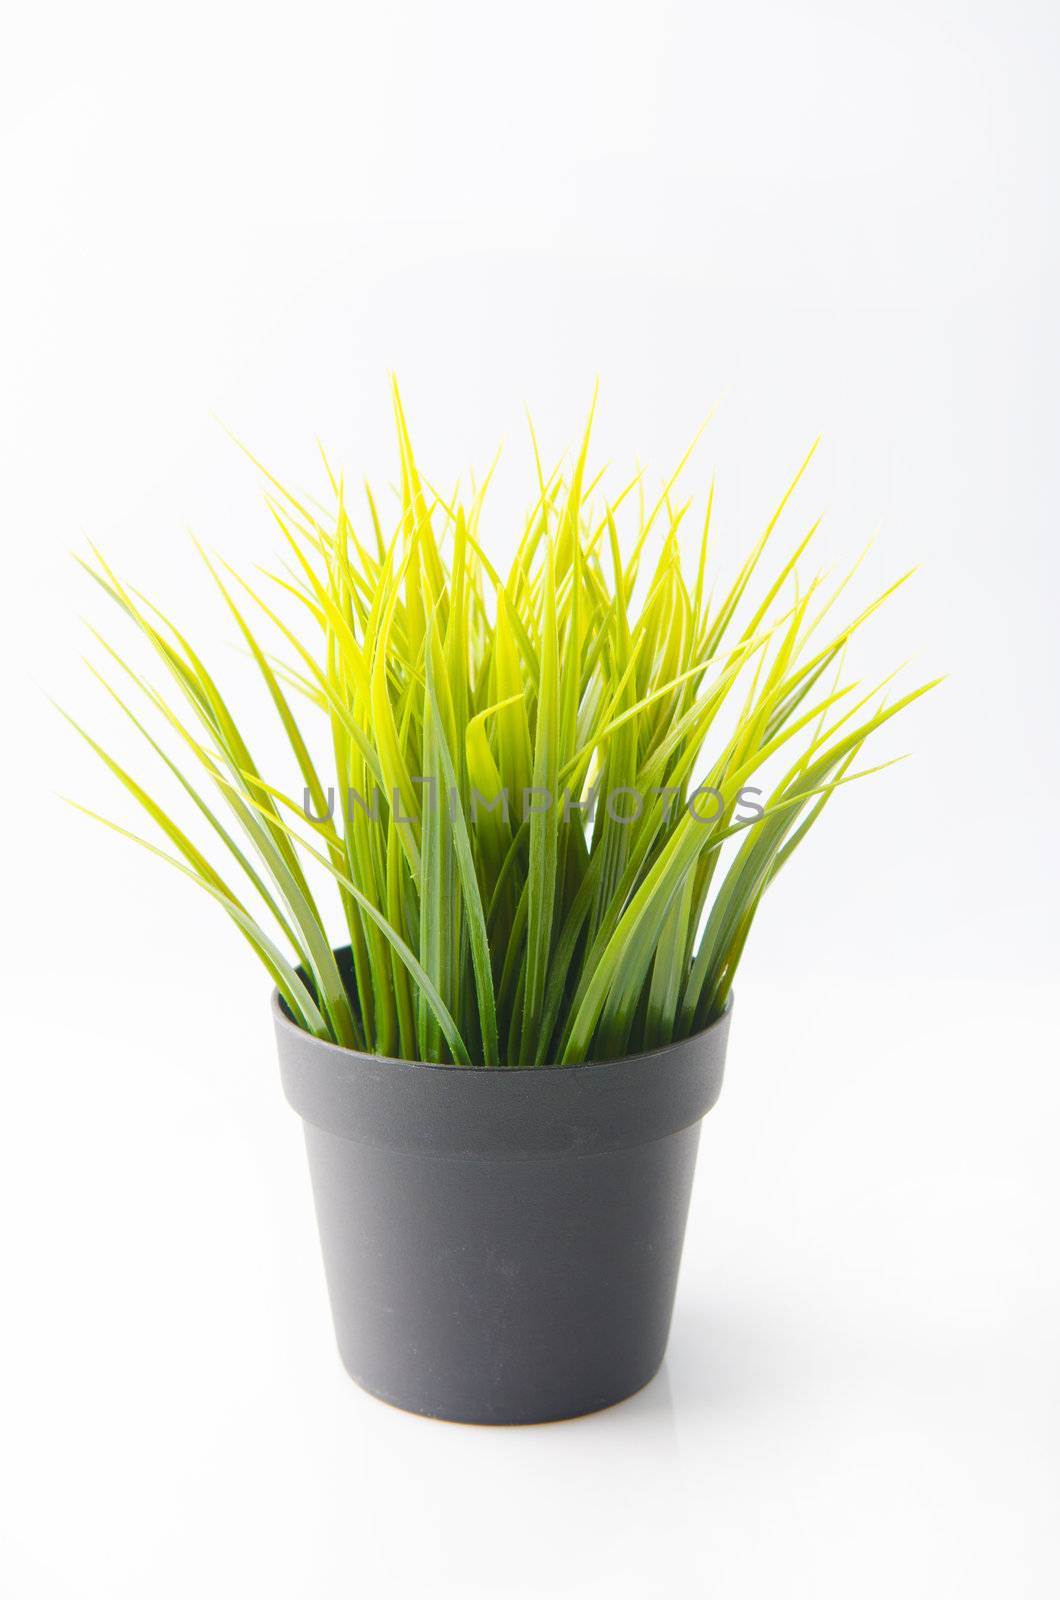 grass plant for indoor